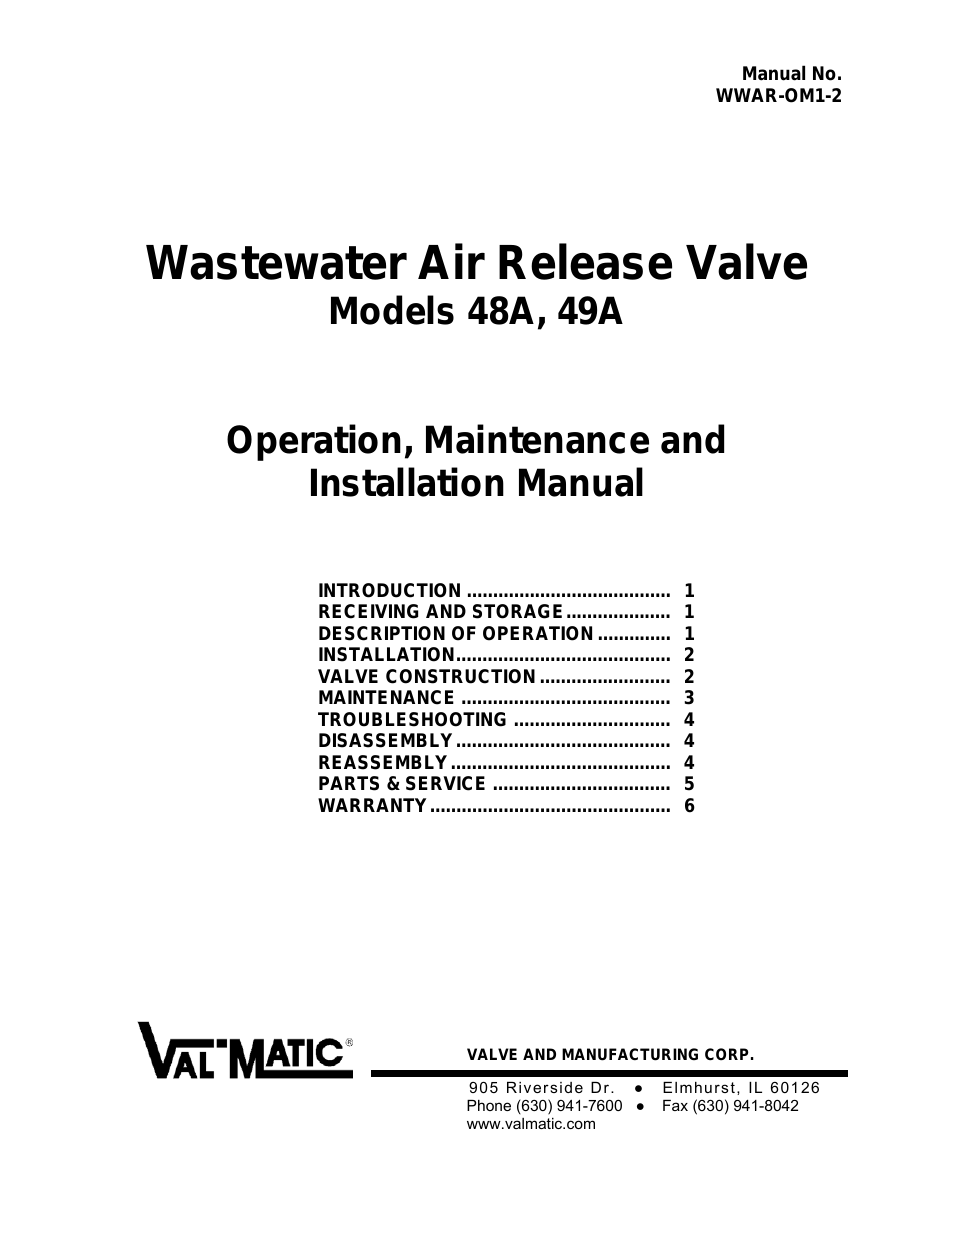 49A Wastewater Air Release Valve